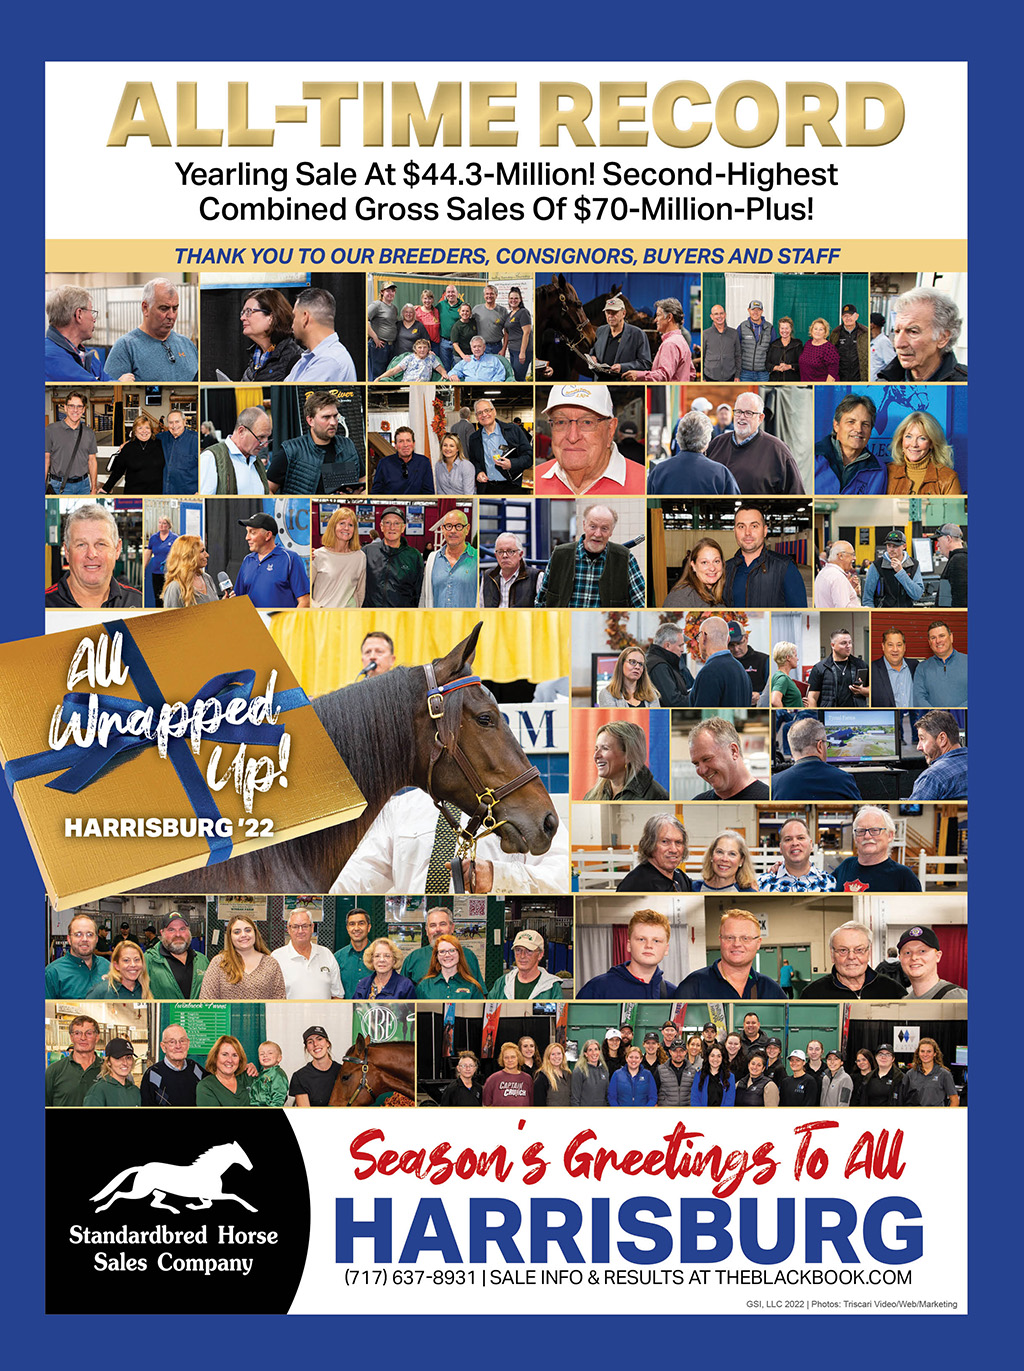 Standardbred Horse Sales Co.